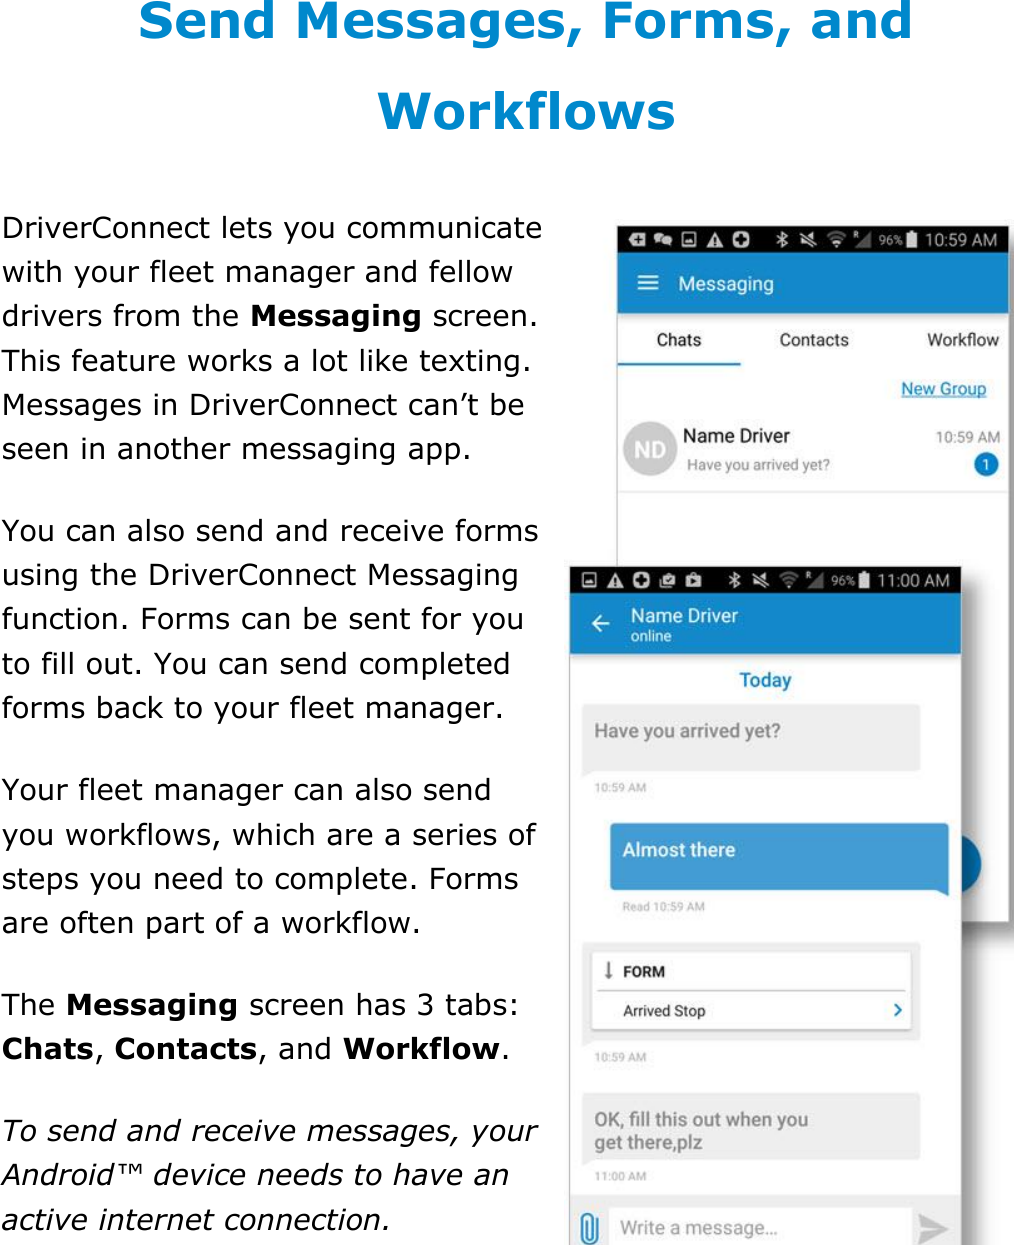 Send Messages, Forms, and Workflows DriverConnect User Guide  68 © 2016-2017, Rand McNally, Inc. Send Messages, Forms, and Workflows DriverConnect lets you communicate with your fleet manager and fellow drivers from the Messaging screen. This feature works a lot like texting. Messages in DriverConnect can’t be seen in another messaging app. You can also send and receive forms using the DriverConnect Messaging function. Forms can be sent for you to fill out. You can send completed forms back to your fleet manager. Your fleet manager can also send you workflows, which are a series of steps you need to complete. Forms are often part of a workflow. The Messaging screen has 3 tabs: Chats, Contacts, and Workflow. To send and receive messages, your Android™ device needs to have an active internet connection.   